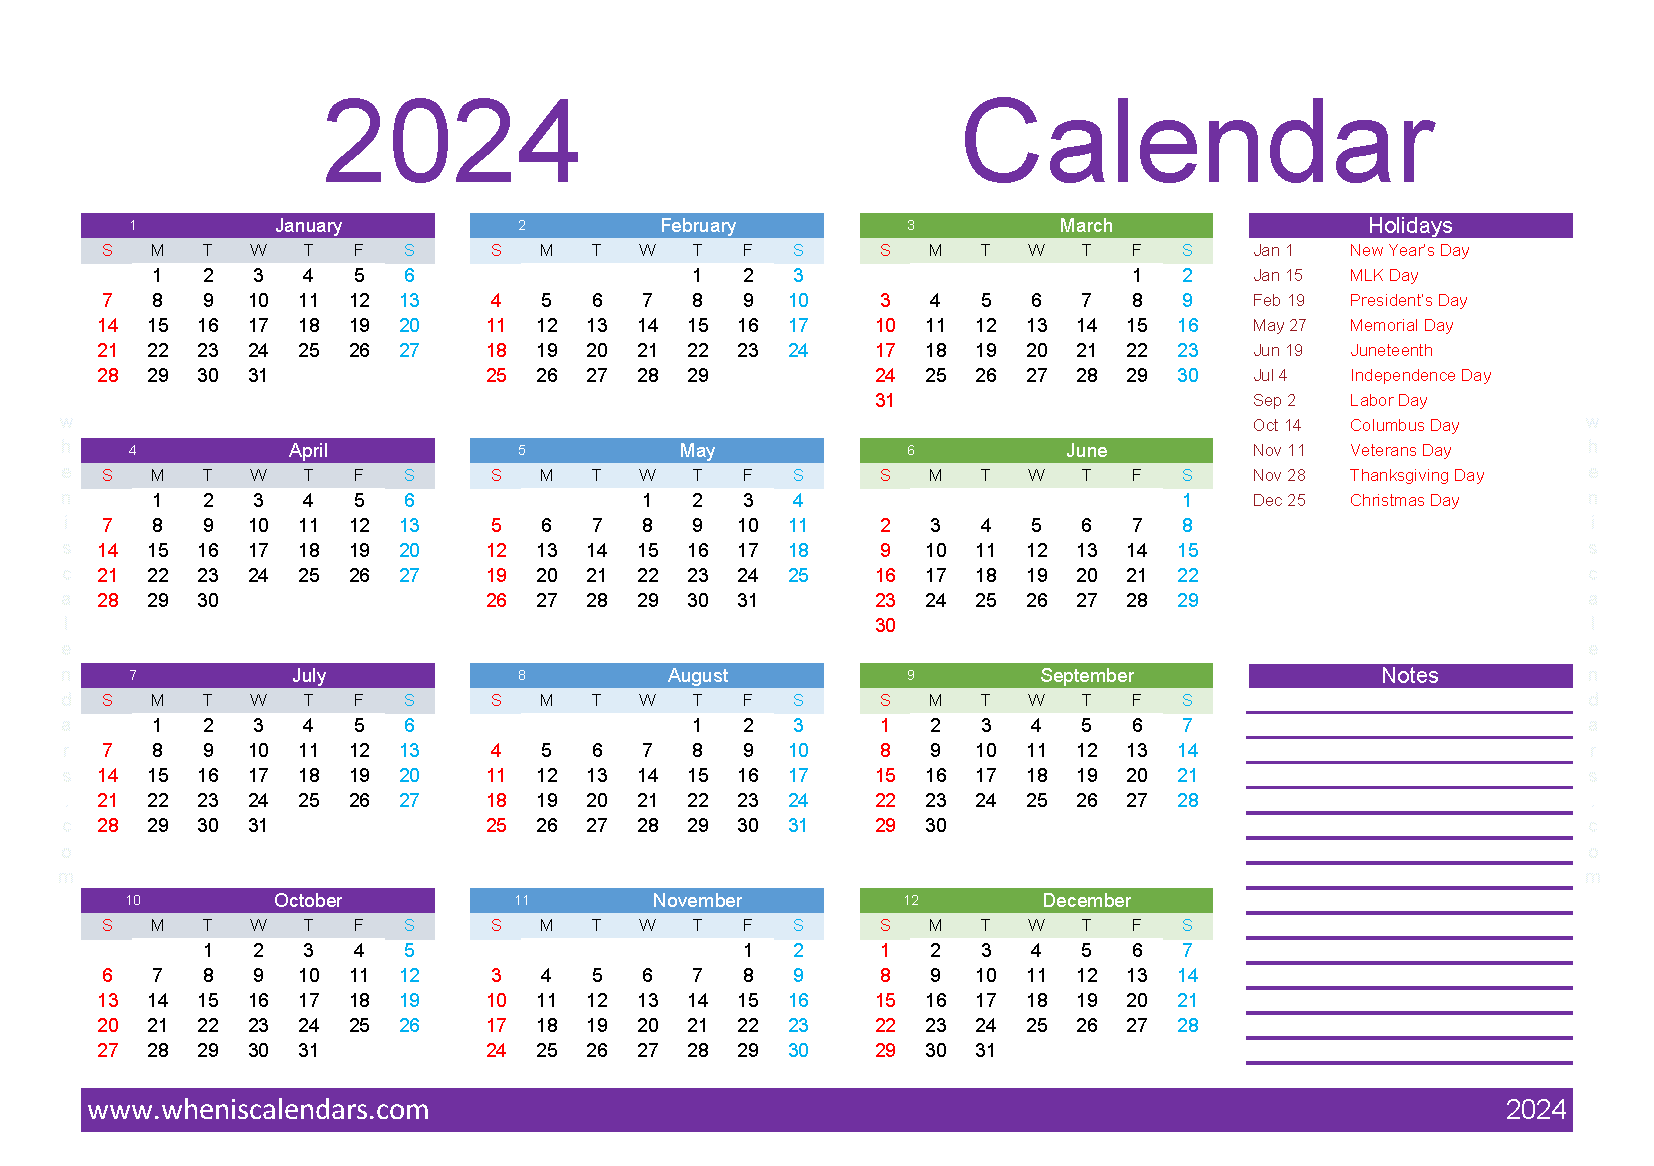 Free Calendar 2024 with Holidays printable A5 in horizontal landscape